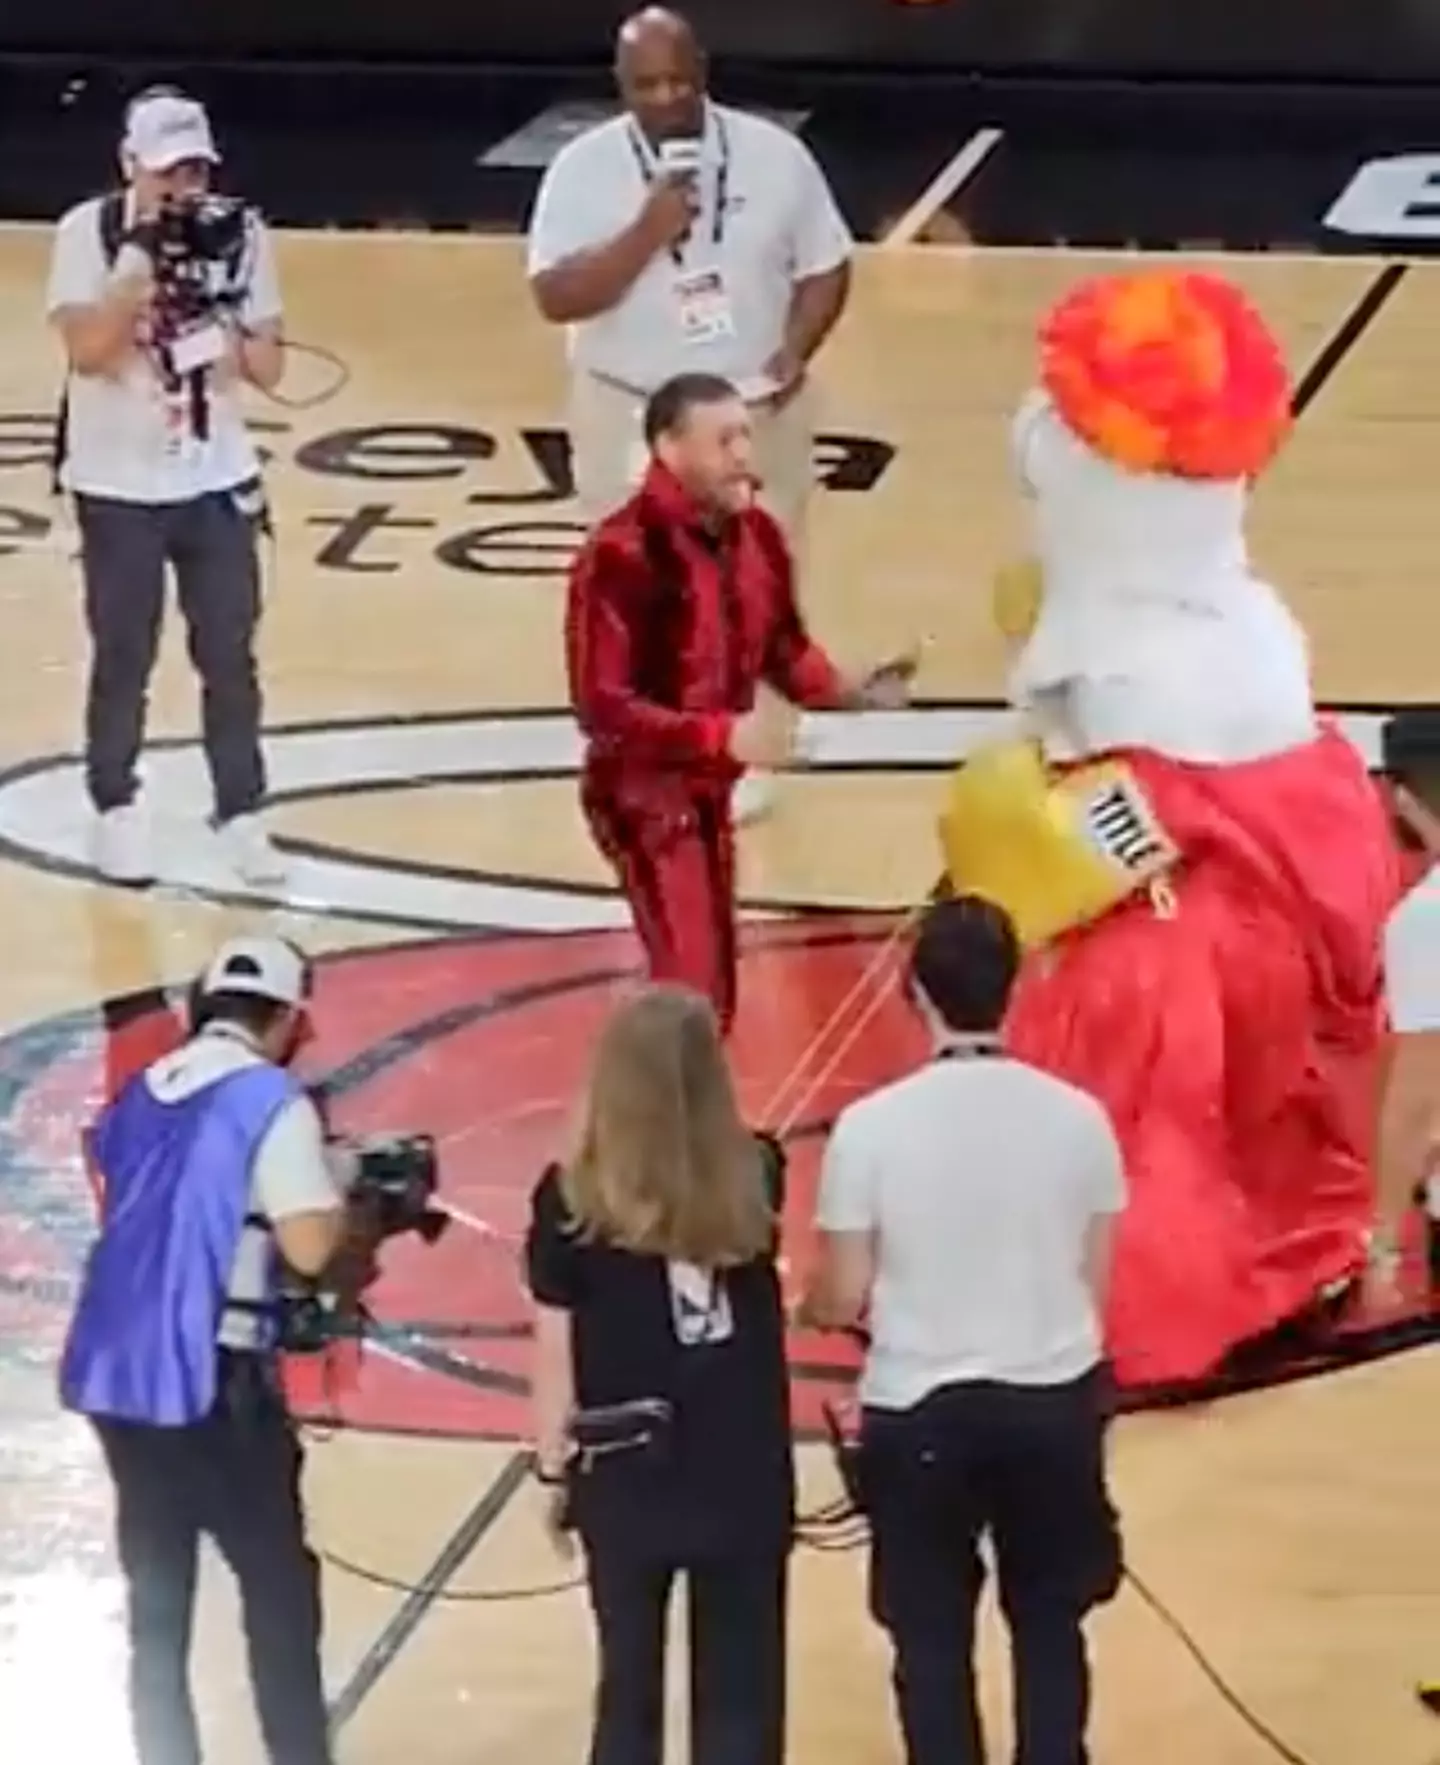 Conor McGregor face to face with Burnie the mascot.